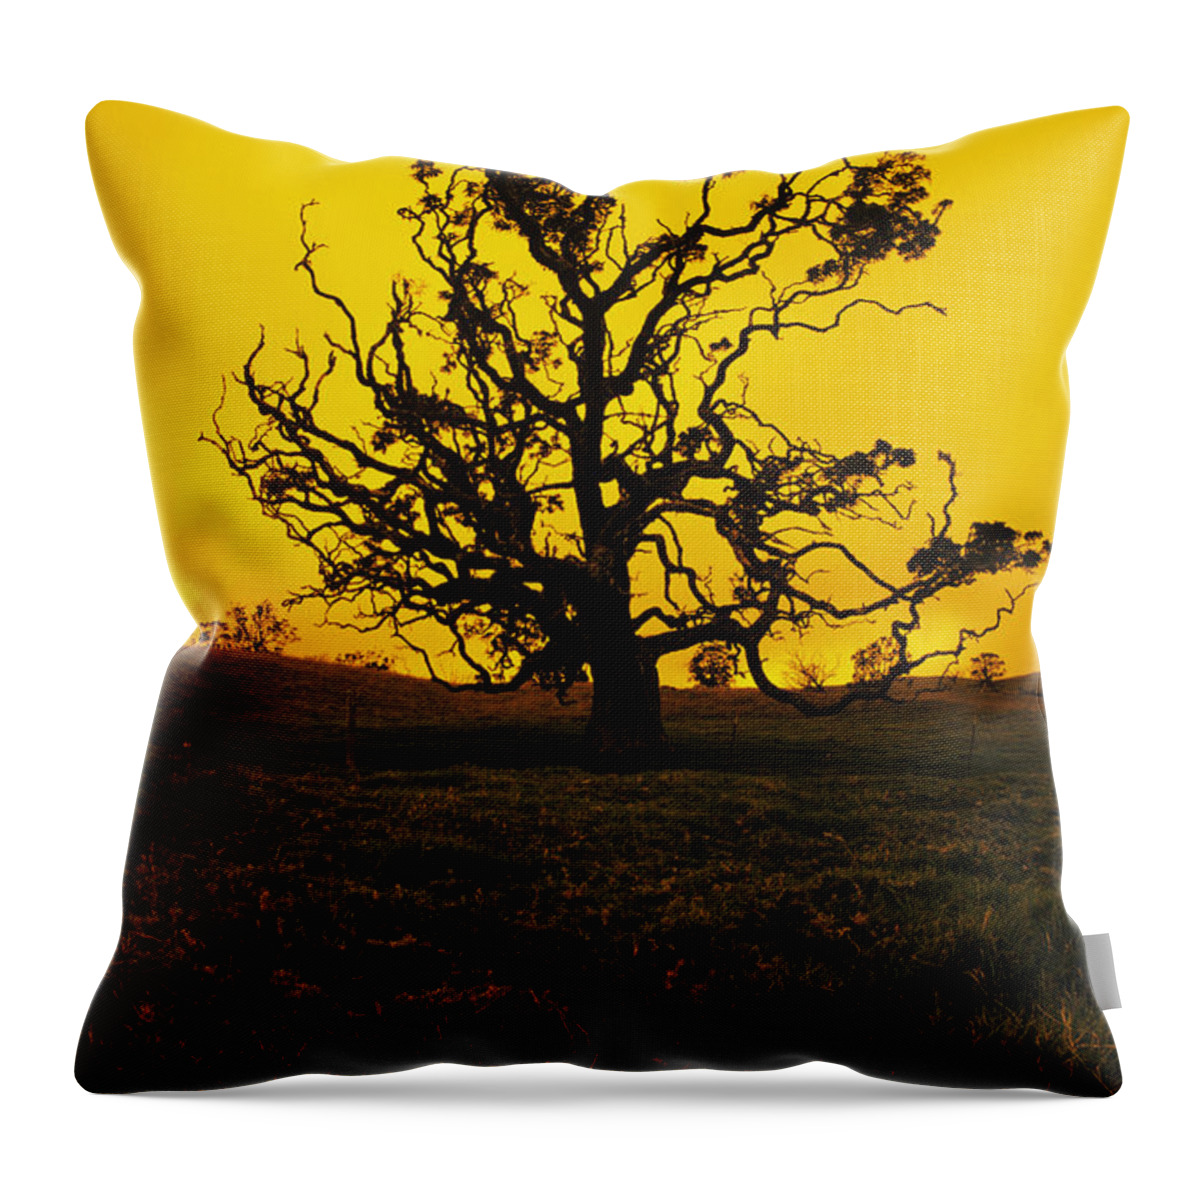 Alone Throw Pillow featuring the photograph Koa Tree Silhouette by Carl Shaneff - Printscapes